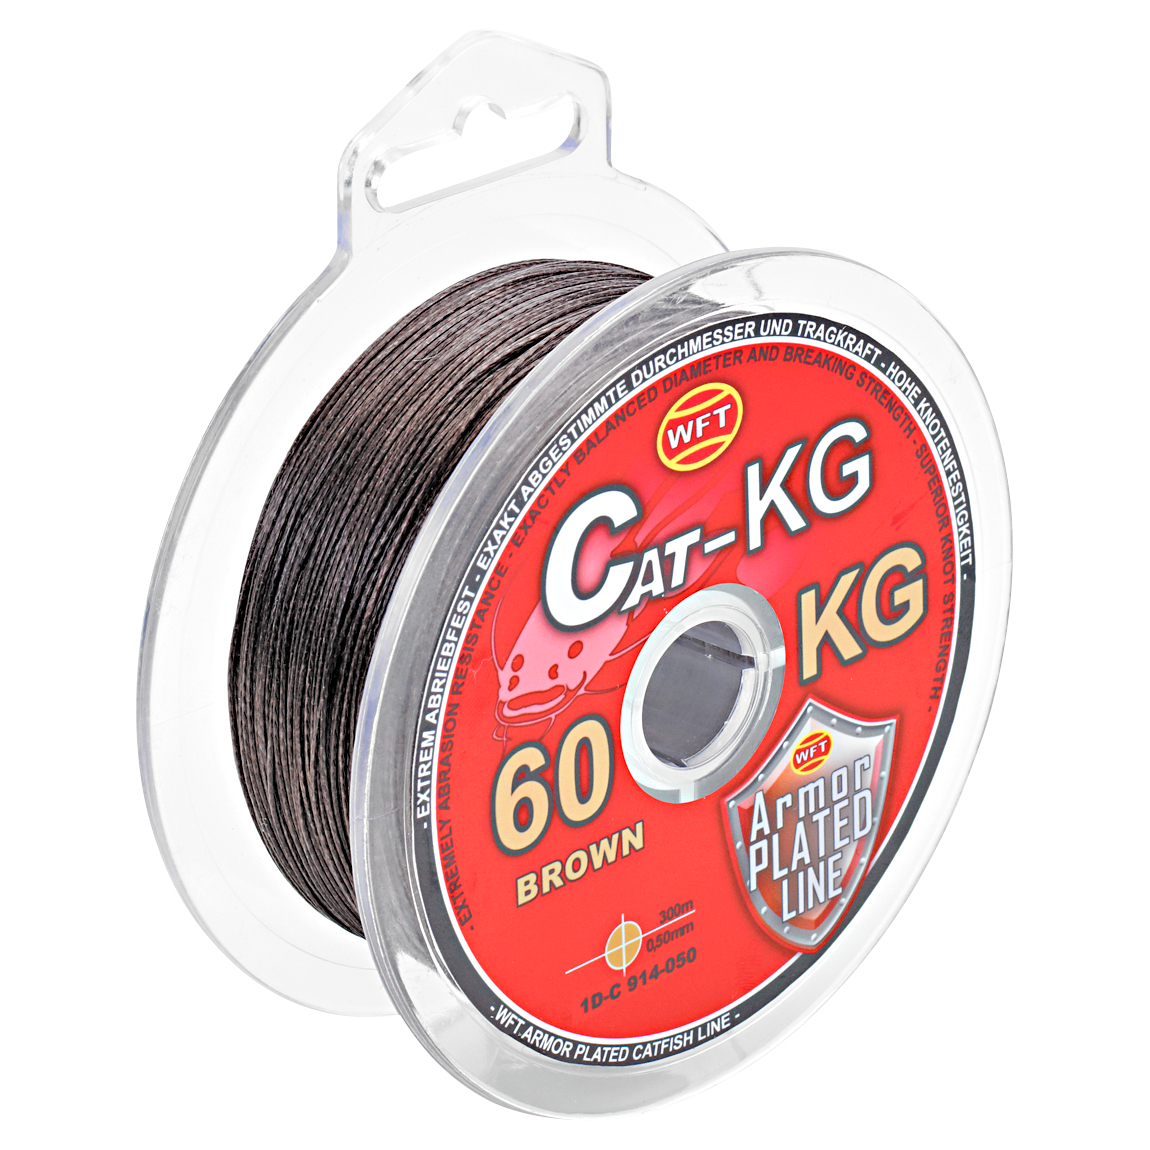 WFT Fishing Line Cat KG (brown, 300 m) at low prices